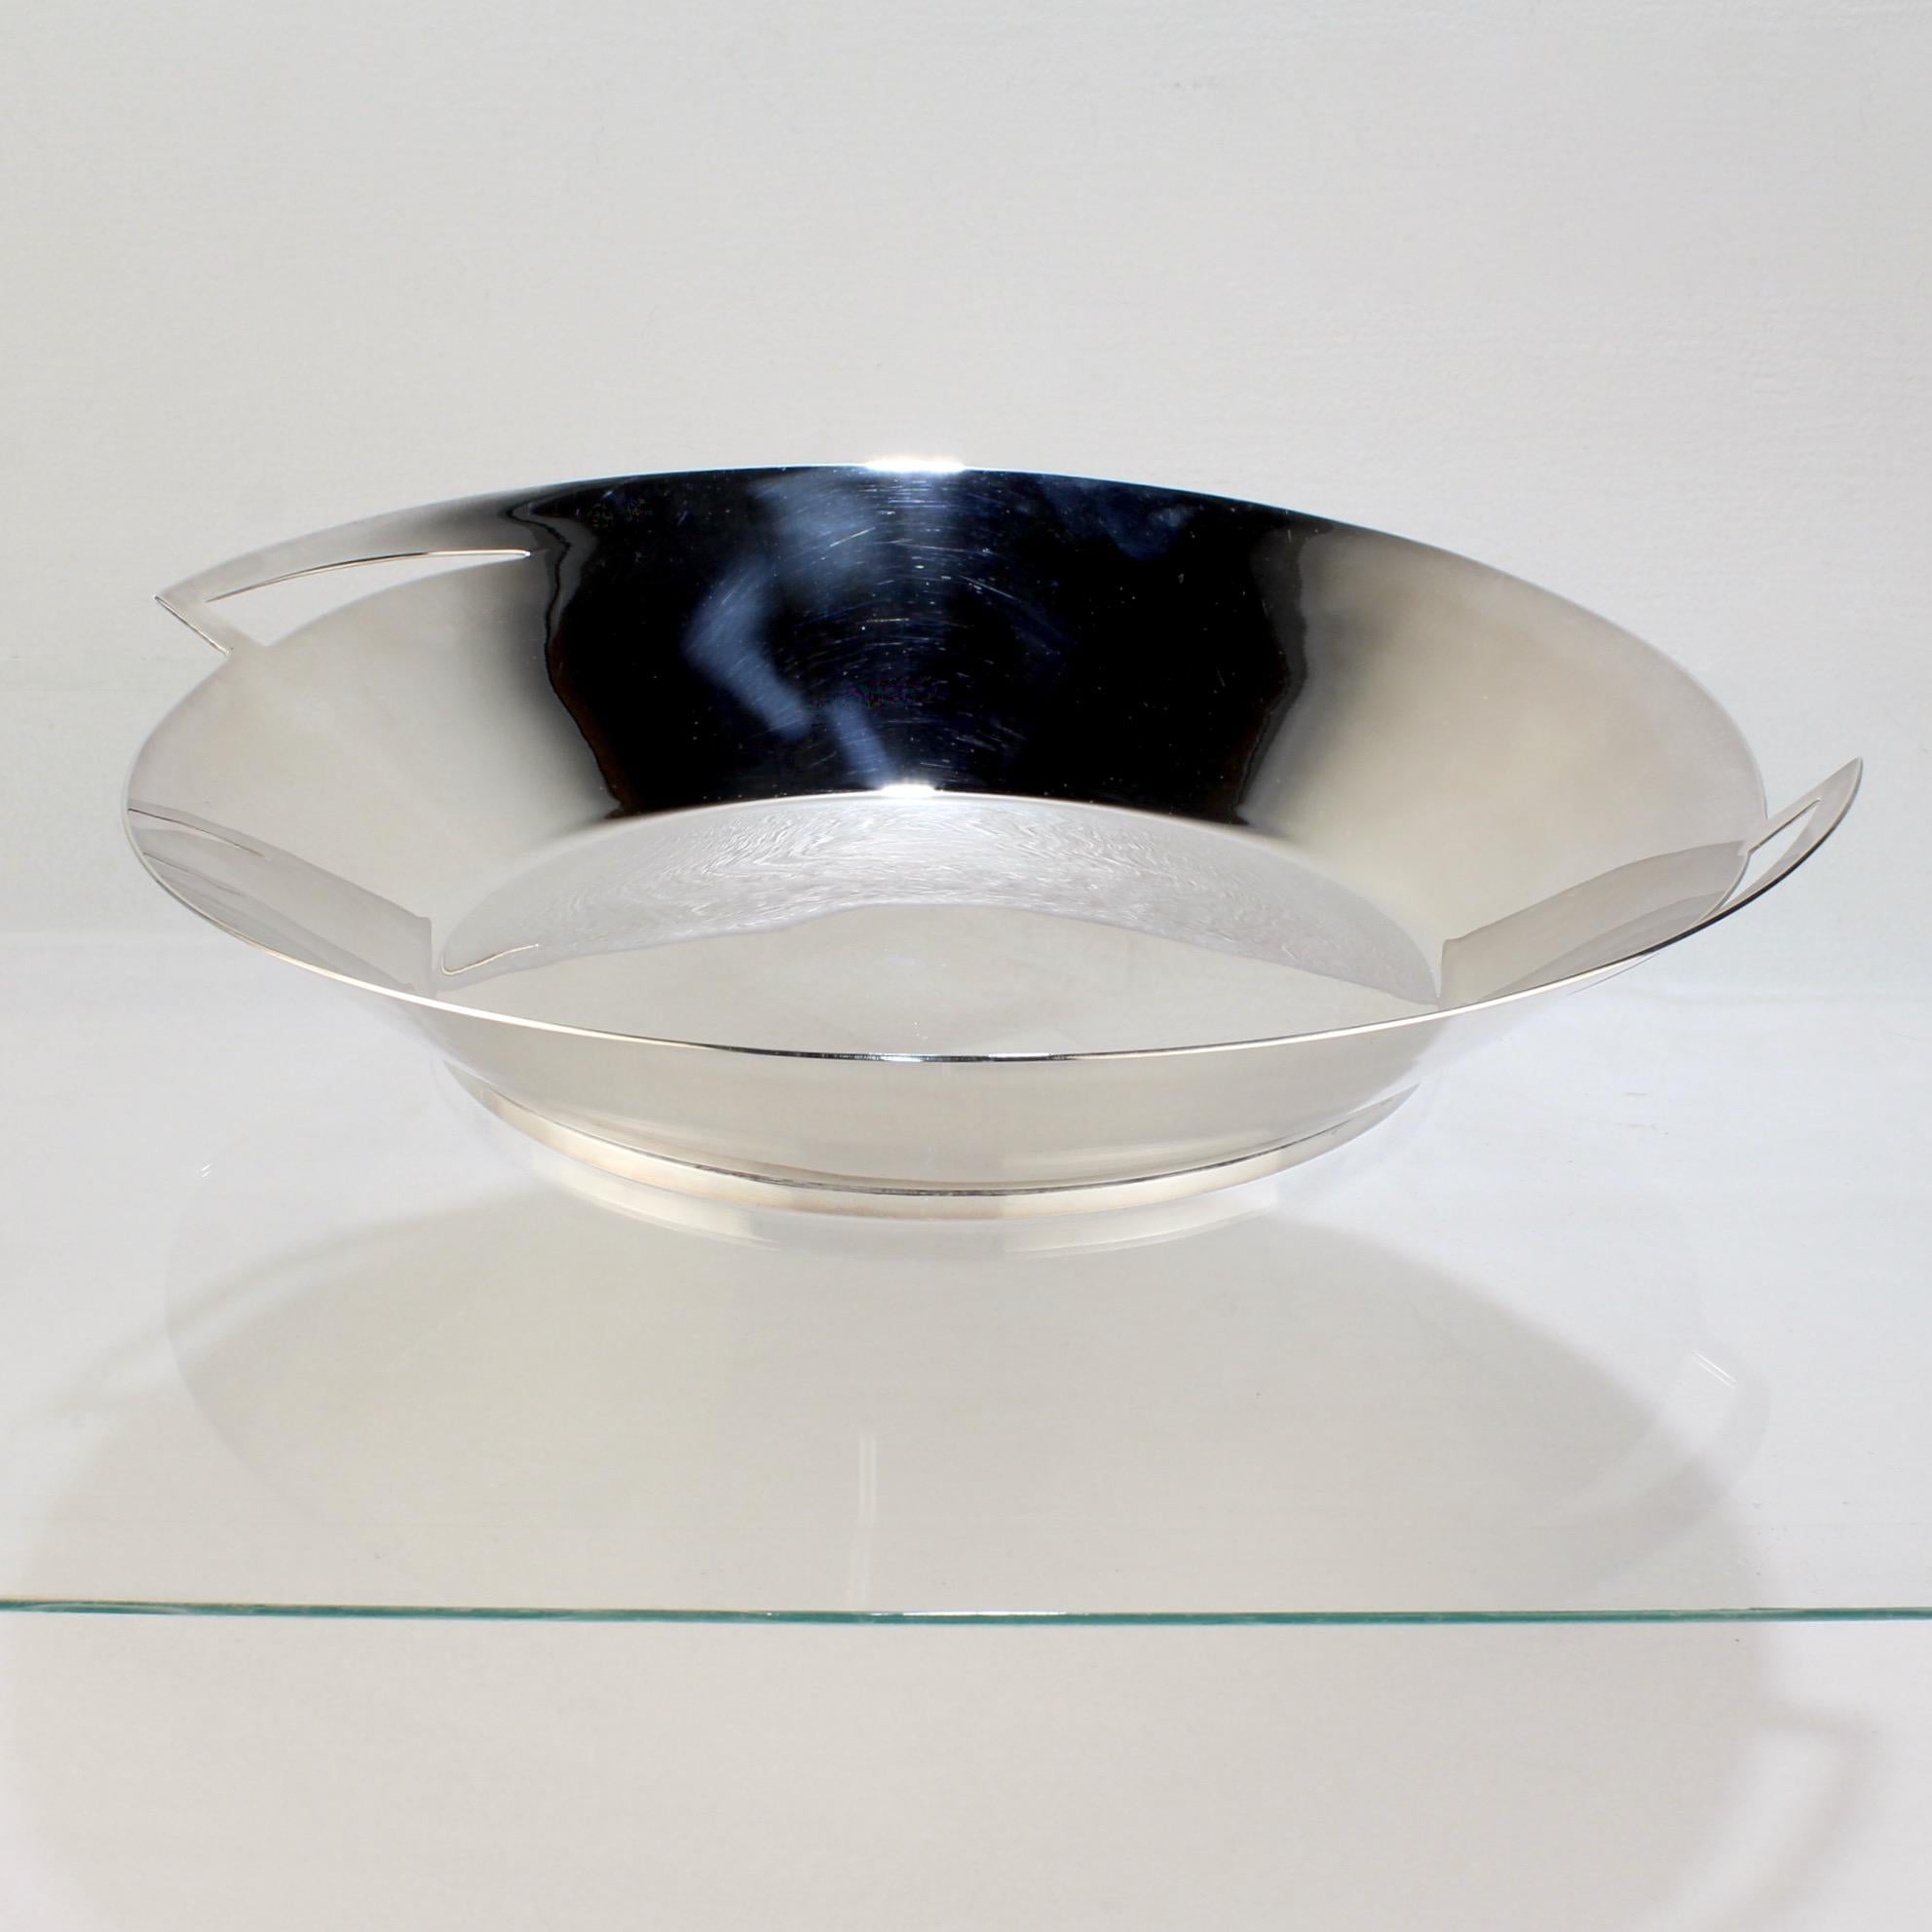 A fine 'Lily' silver-plated bowl.

Designed by Elsa Rady for Swid Powell.

Model no. 3320.

Together with its original box and paperwork insert.

Swid Powell was the highly acclaimed New York City based tableware company founded by Nan Swid and